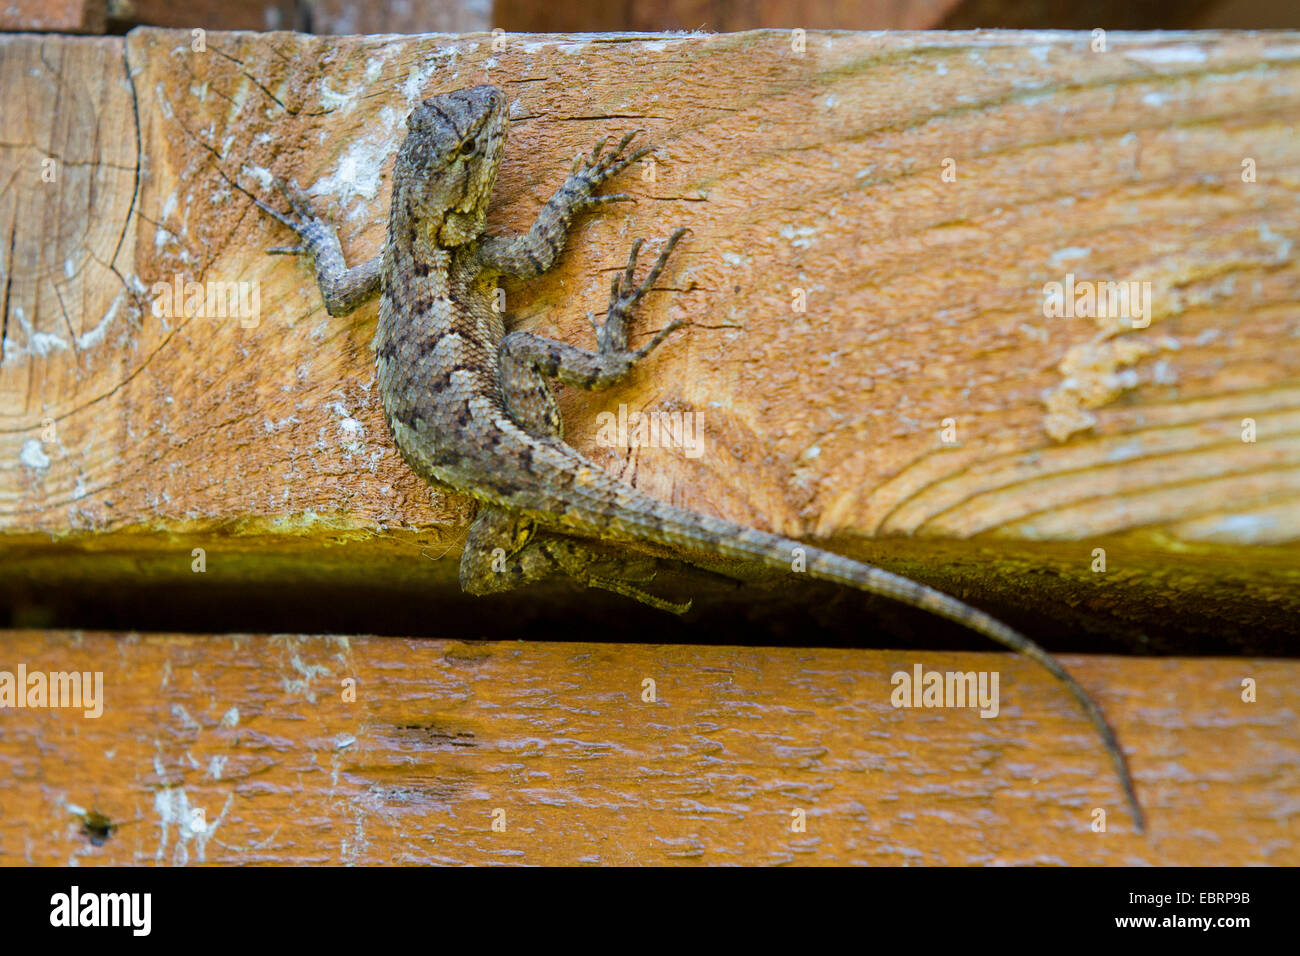 Fence lizard, Eastern fence lizard (Sceloporus undulatus), sits at timber floor board, USA, Tennessee, Great Smoky Mountains National Park Stock Photo